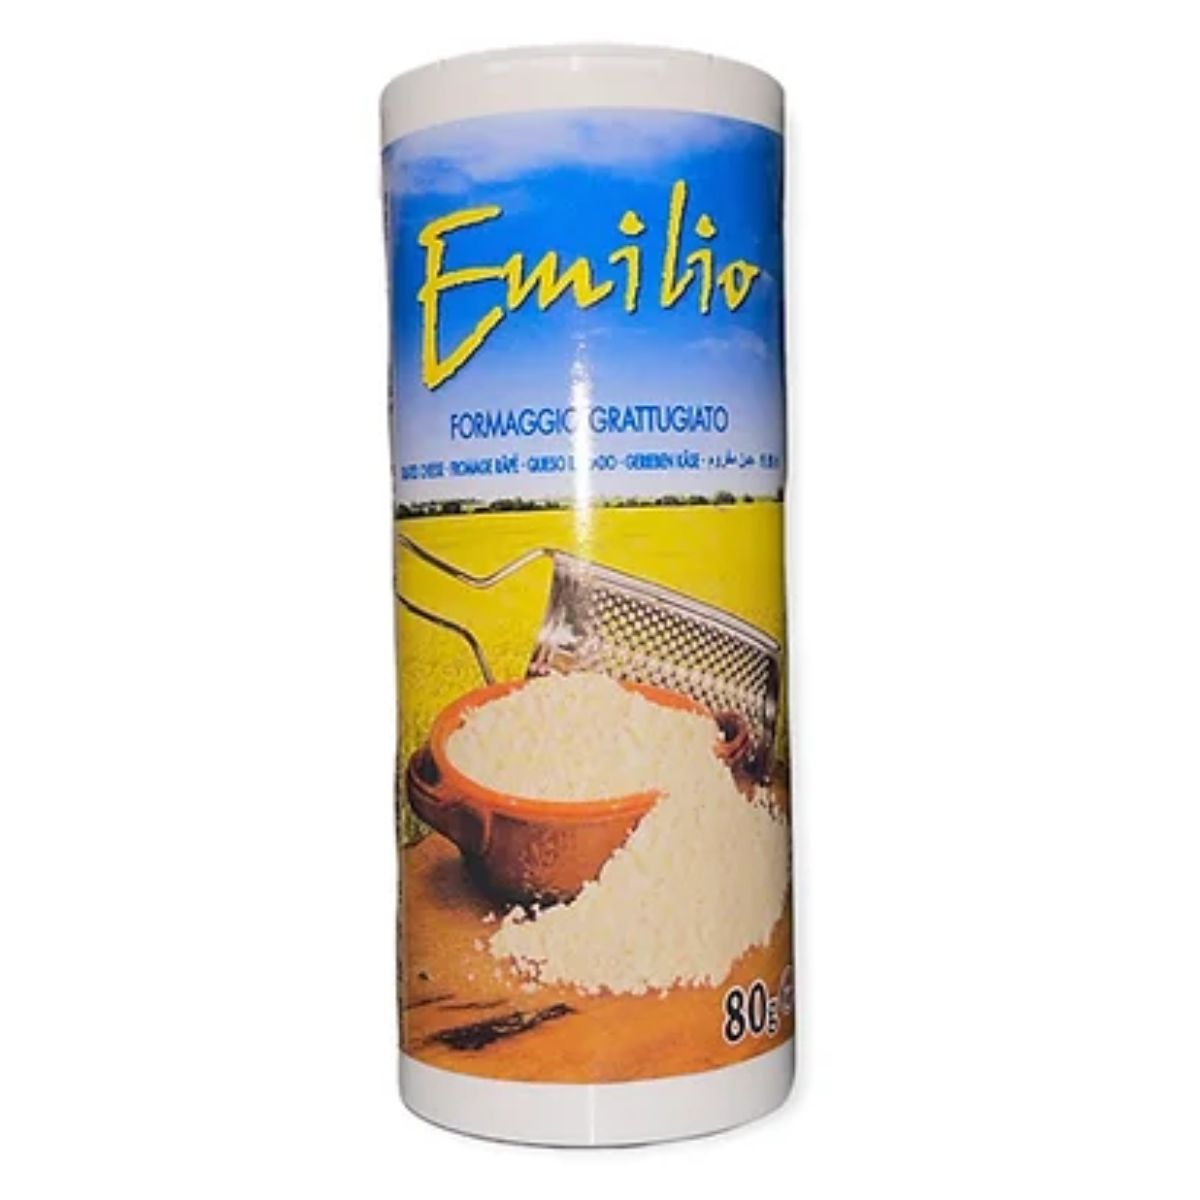 A can of Emilio - Grated Cheese Mix - 80g on a white background.